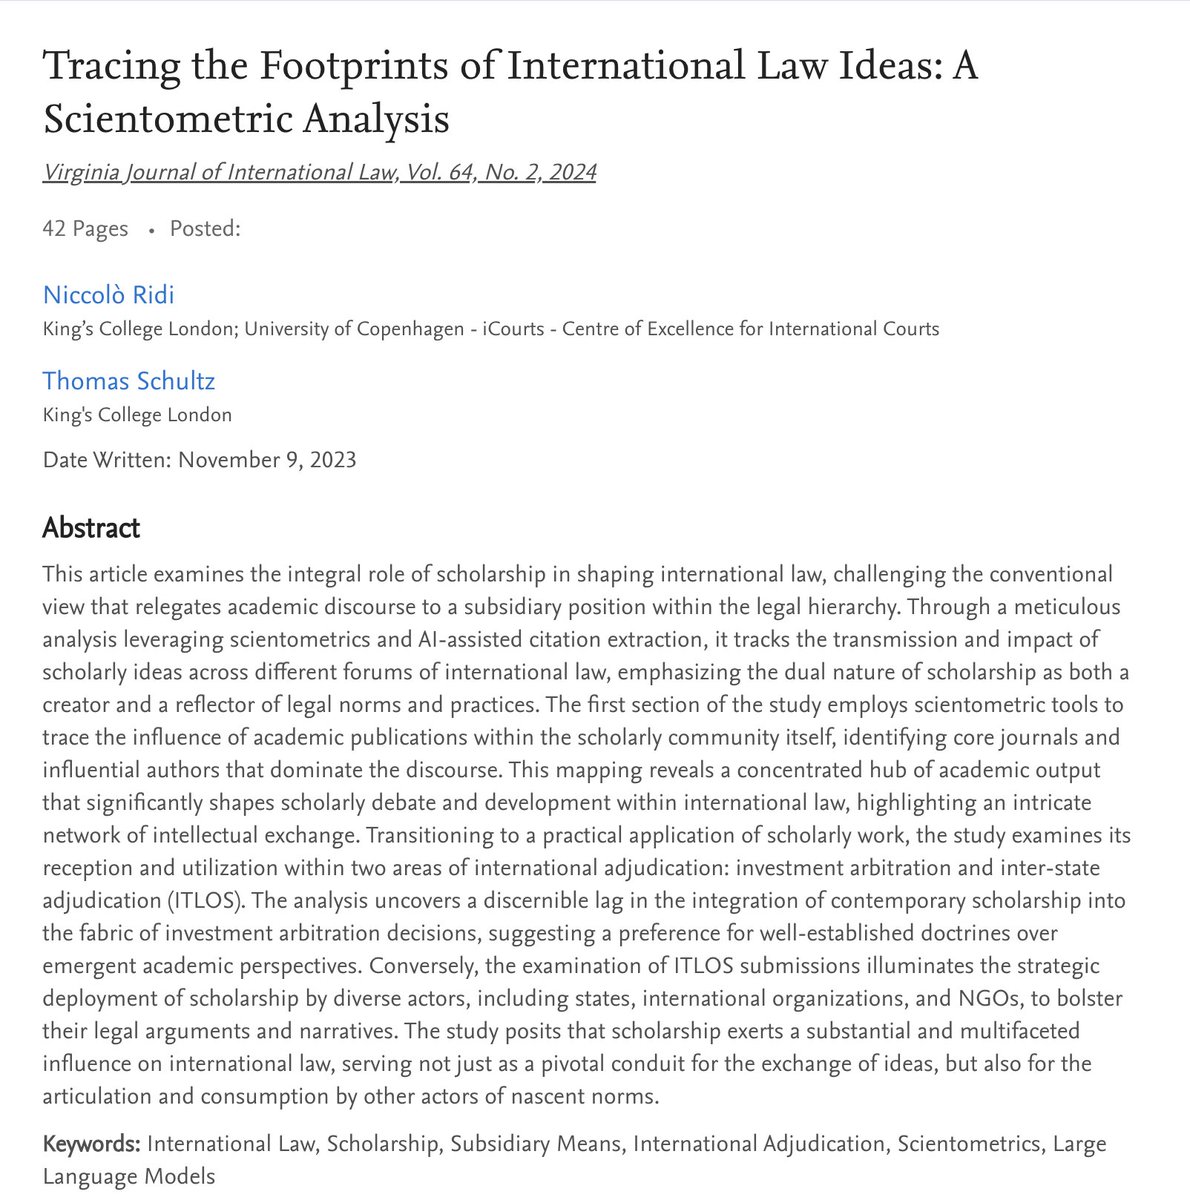 New Paper: 📢 @ThomasKPSchultz and I continue our investigation of the role of scholarship 📚 in international law, leveraging scientometrics and #LLM-assisted 🤖 citation mining to identify scholar-to-scholar citations and references in party pleadings. Forthcoming in @VaJIntlL.